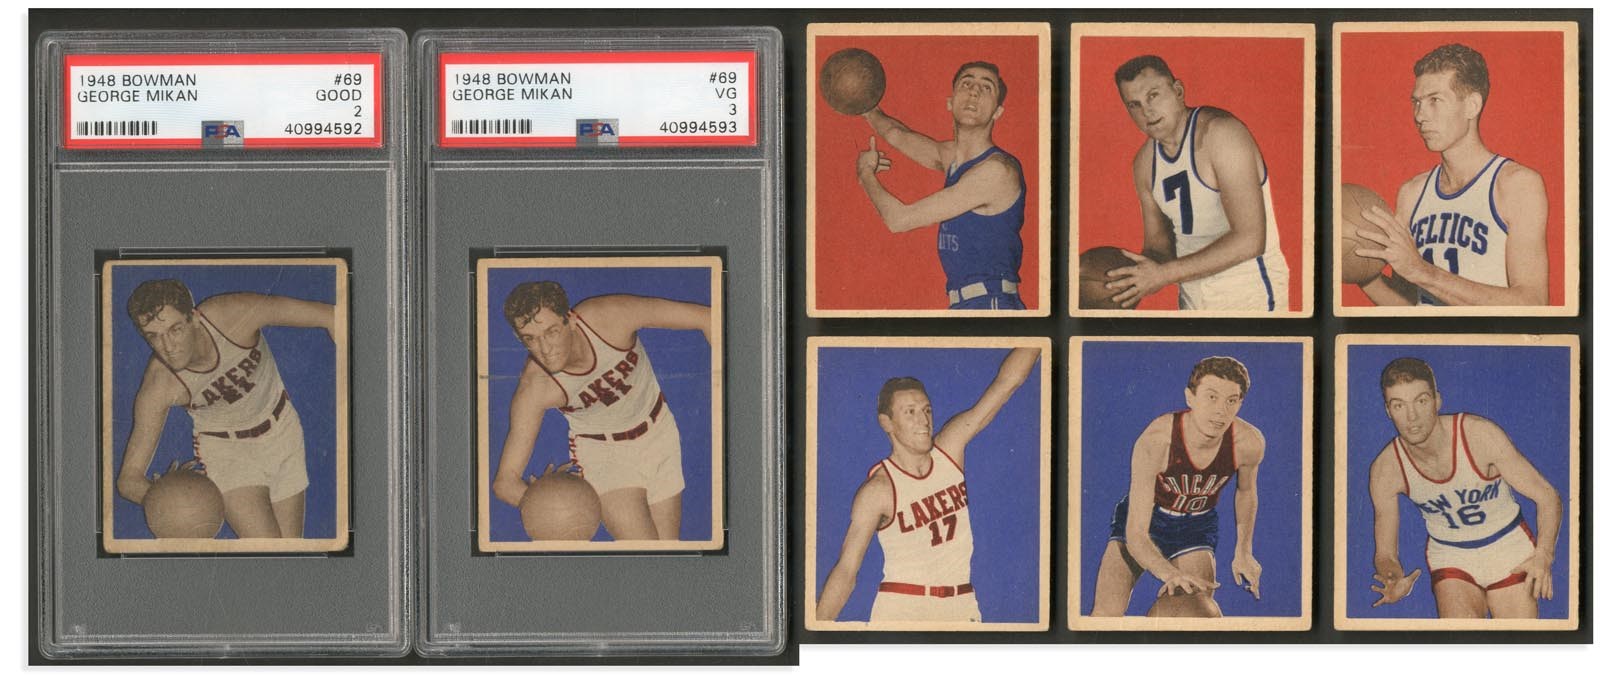 1948 Bowman Basketball Complete Set with (2) PSA Graded Mikan Rookies